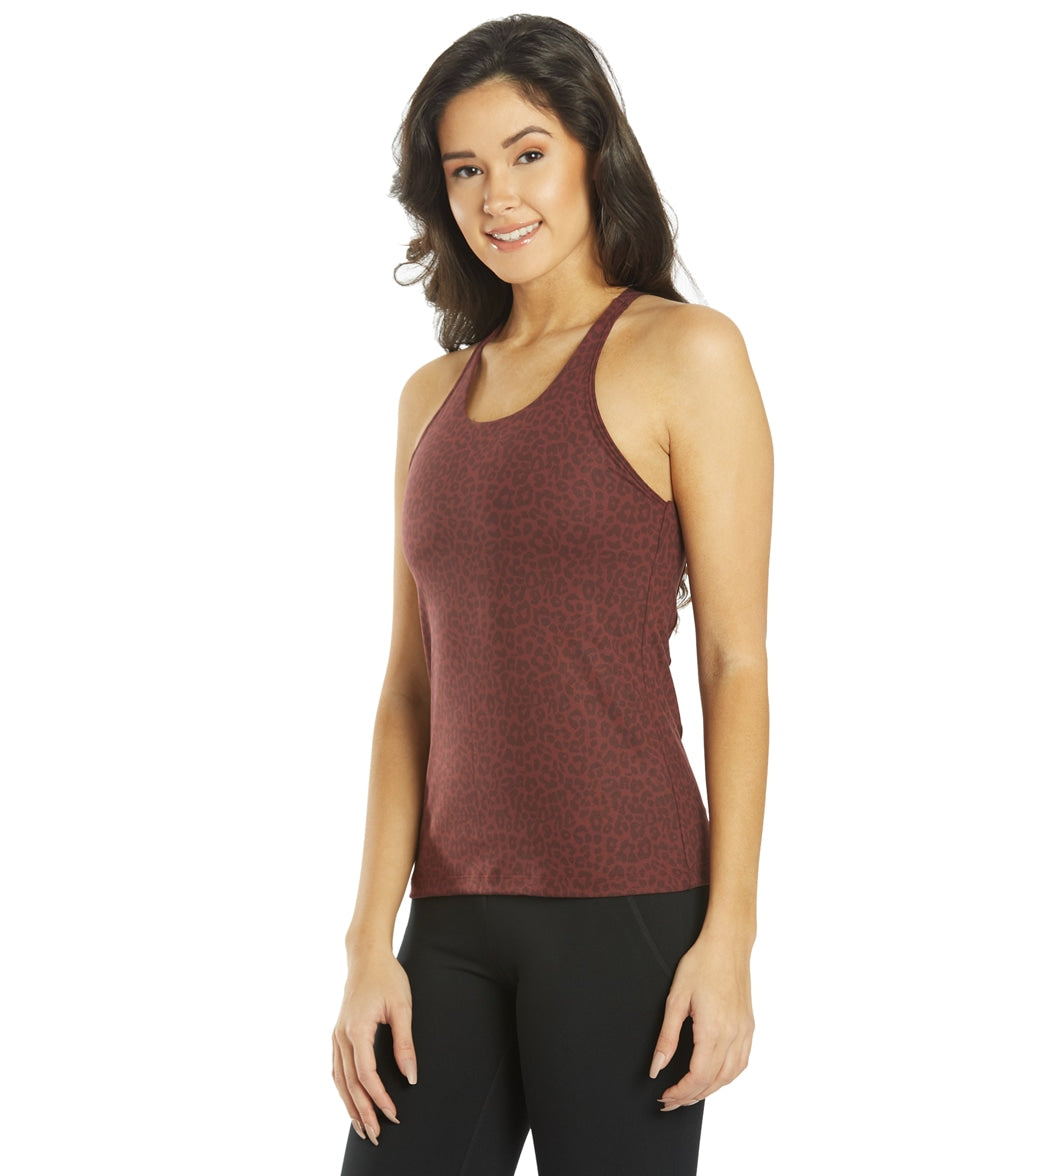 Everyday Yoga Instinct Solid Twisted Back Support Tank at YogaOutlet.com –